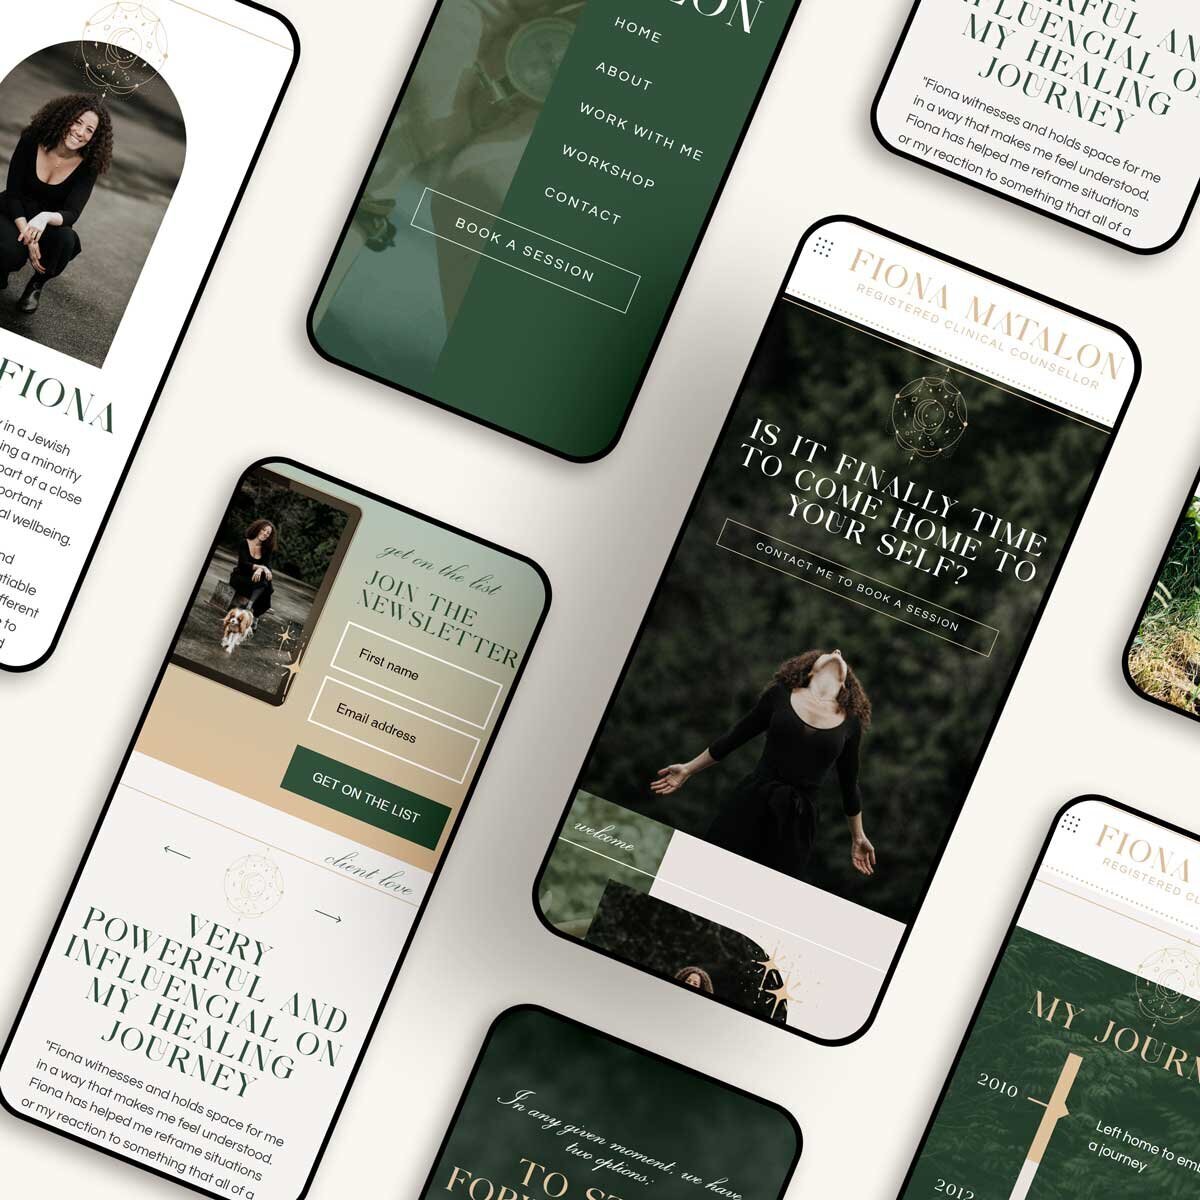 Tour Fiona Mata0lon's full website, crafted to elevate her healing therapy services with creativity and seamless website design solutions for creatives.